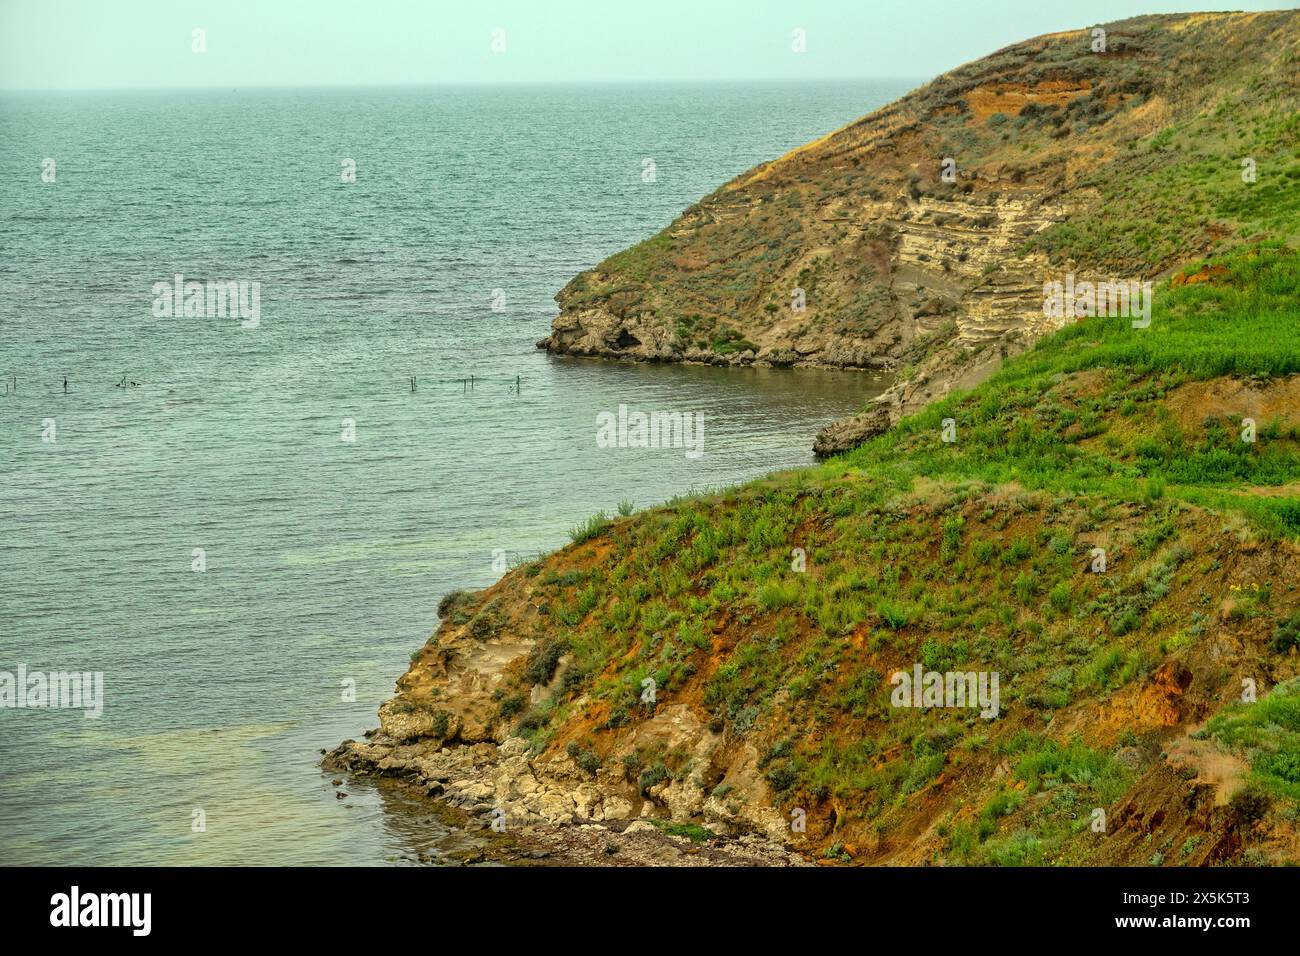 The Parpach limestone crest breaks off in the Crimea into the Sea of Azov. Belongs to the category of low mountains, neogene limestones. Table-land sh Stock Photo